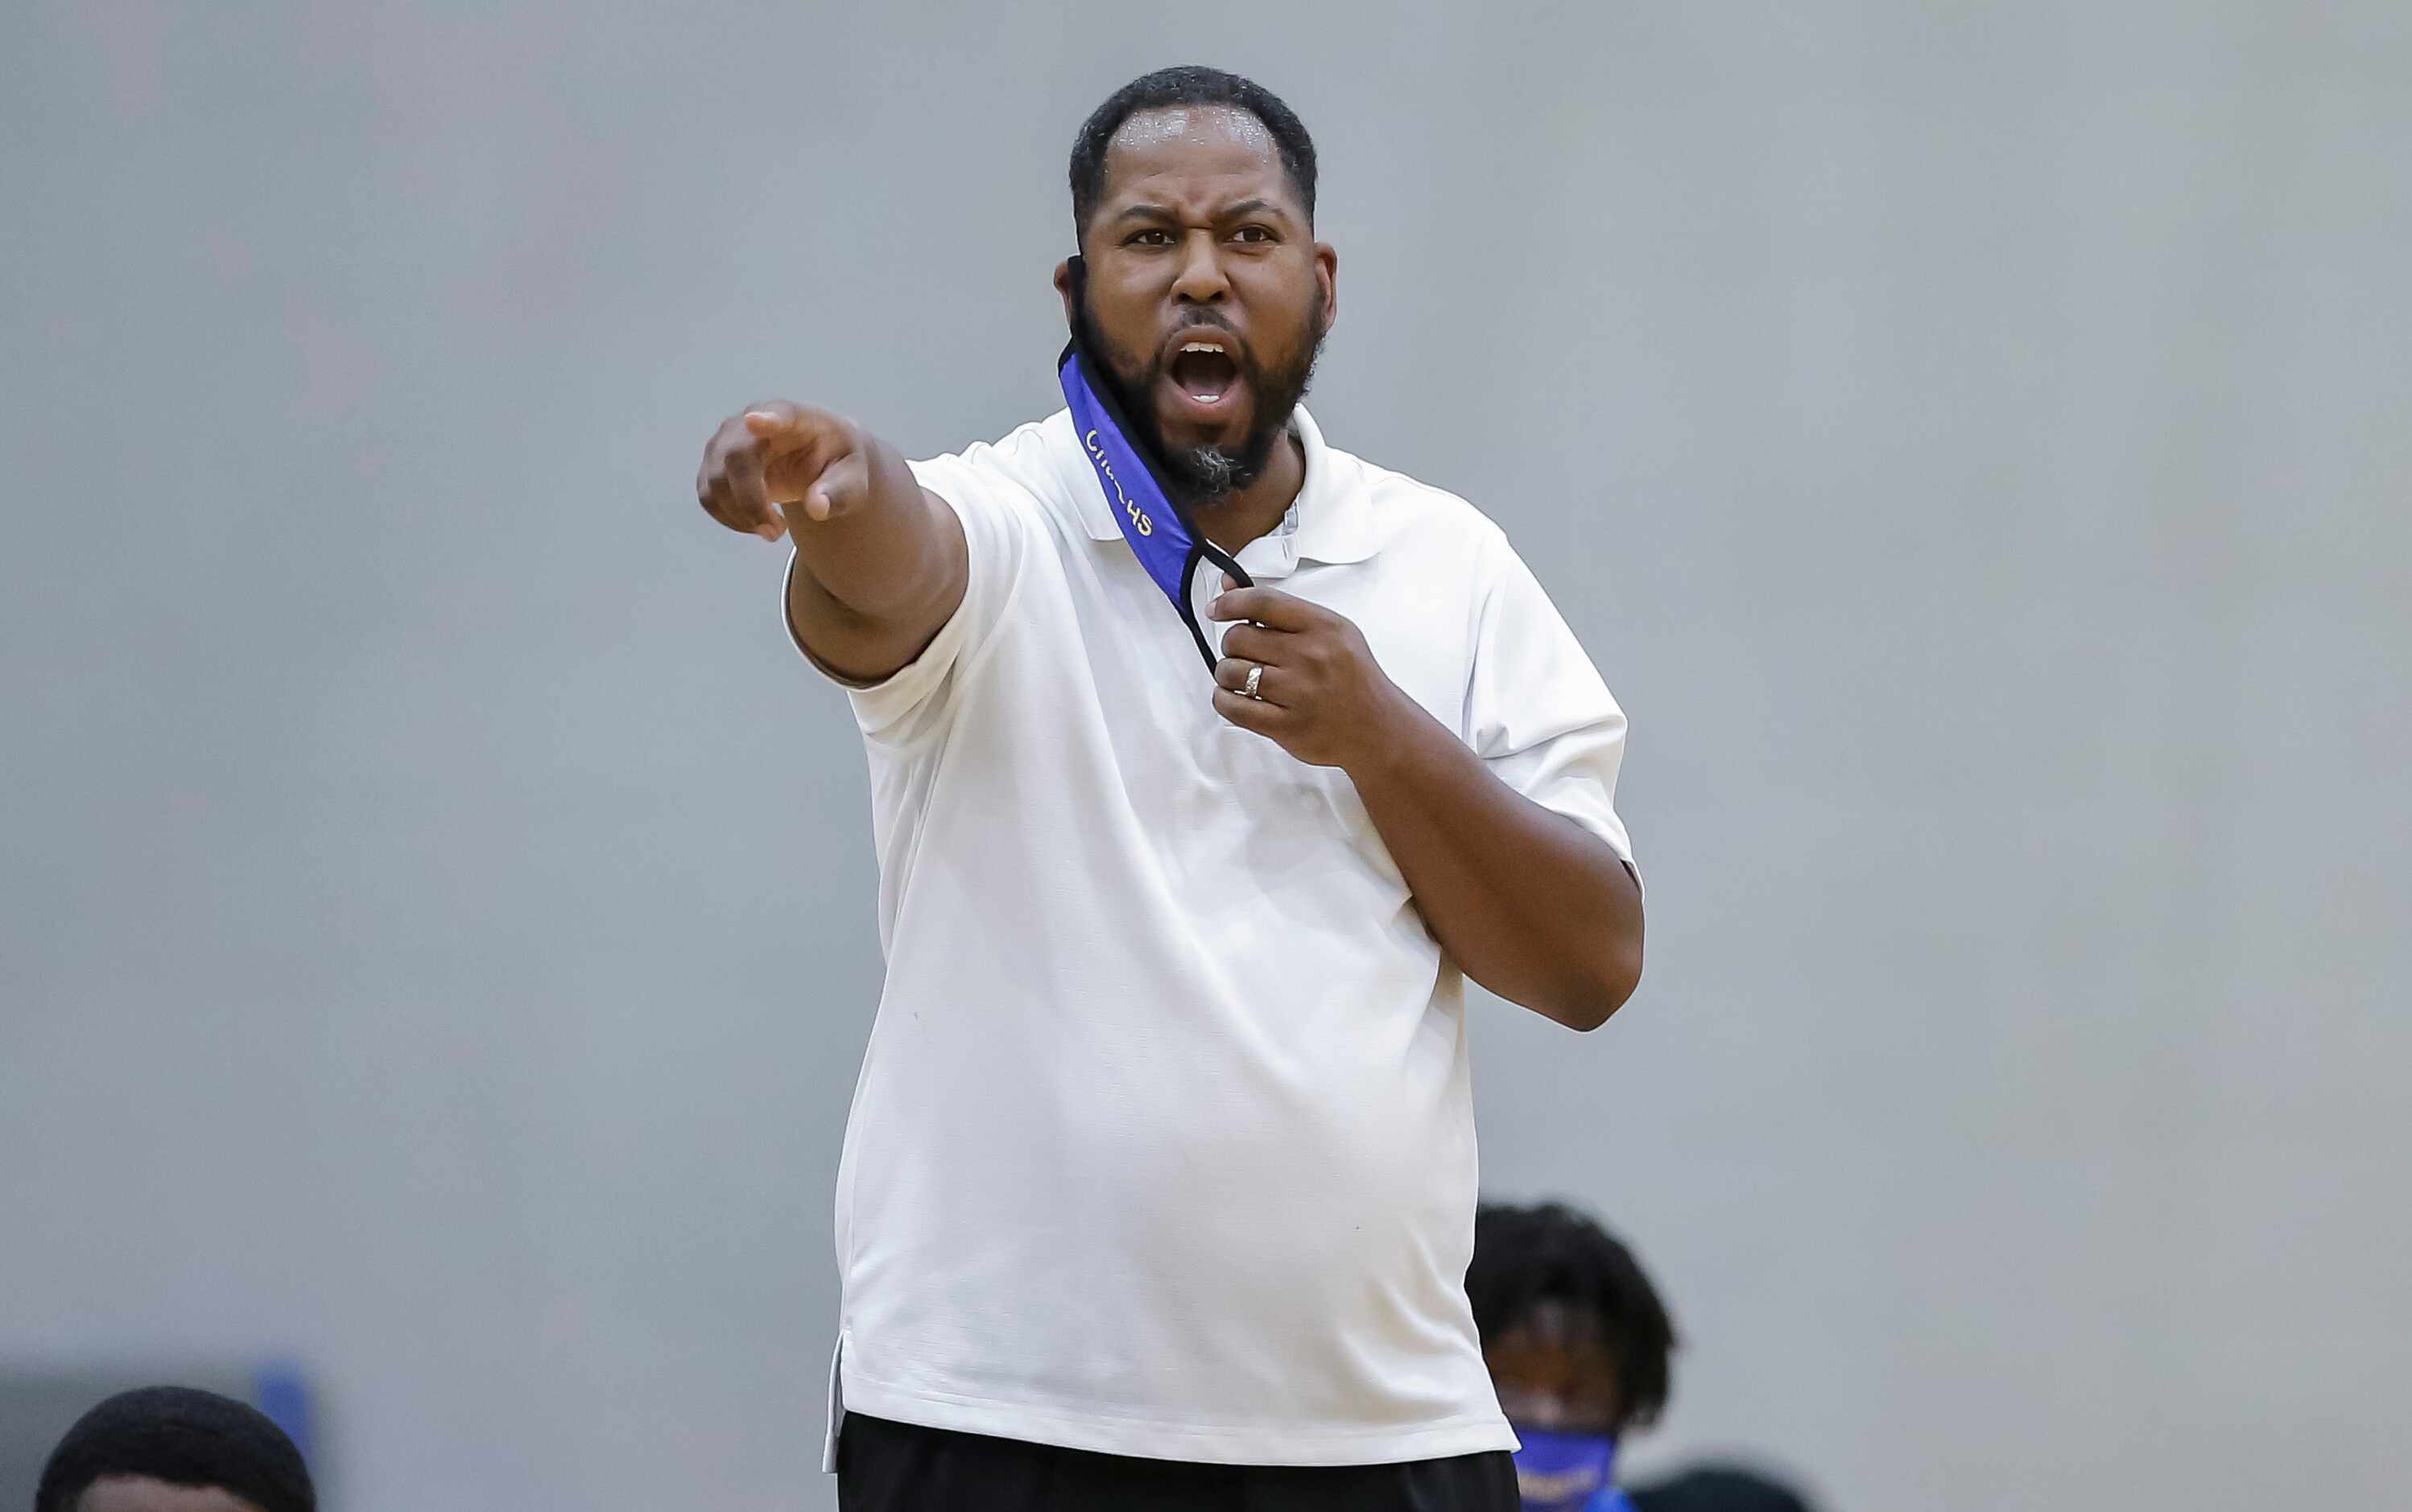 Conrad coach Aubreion Wright shouts instructions to his players during a high school...